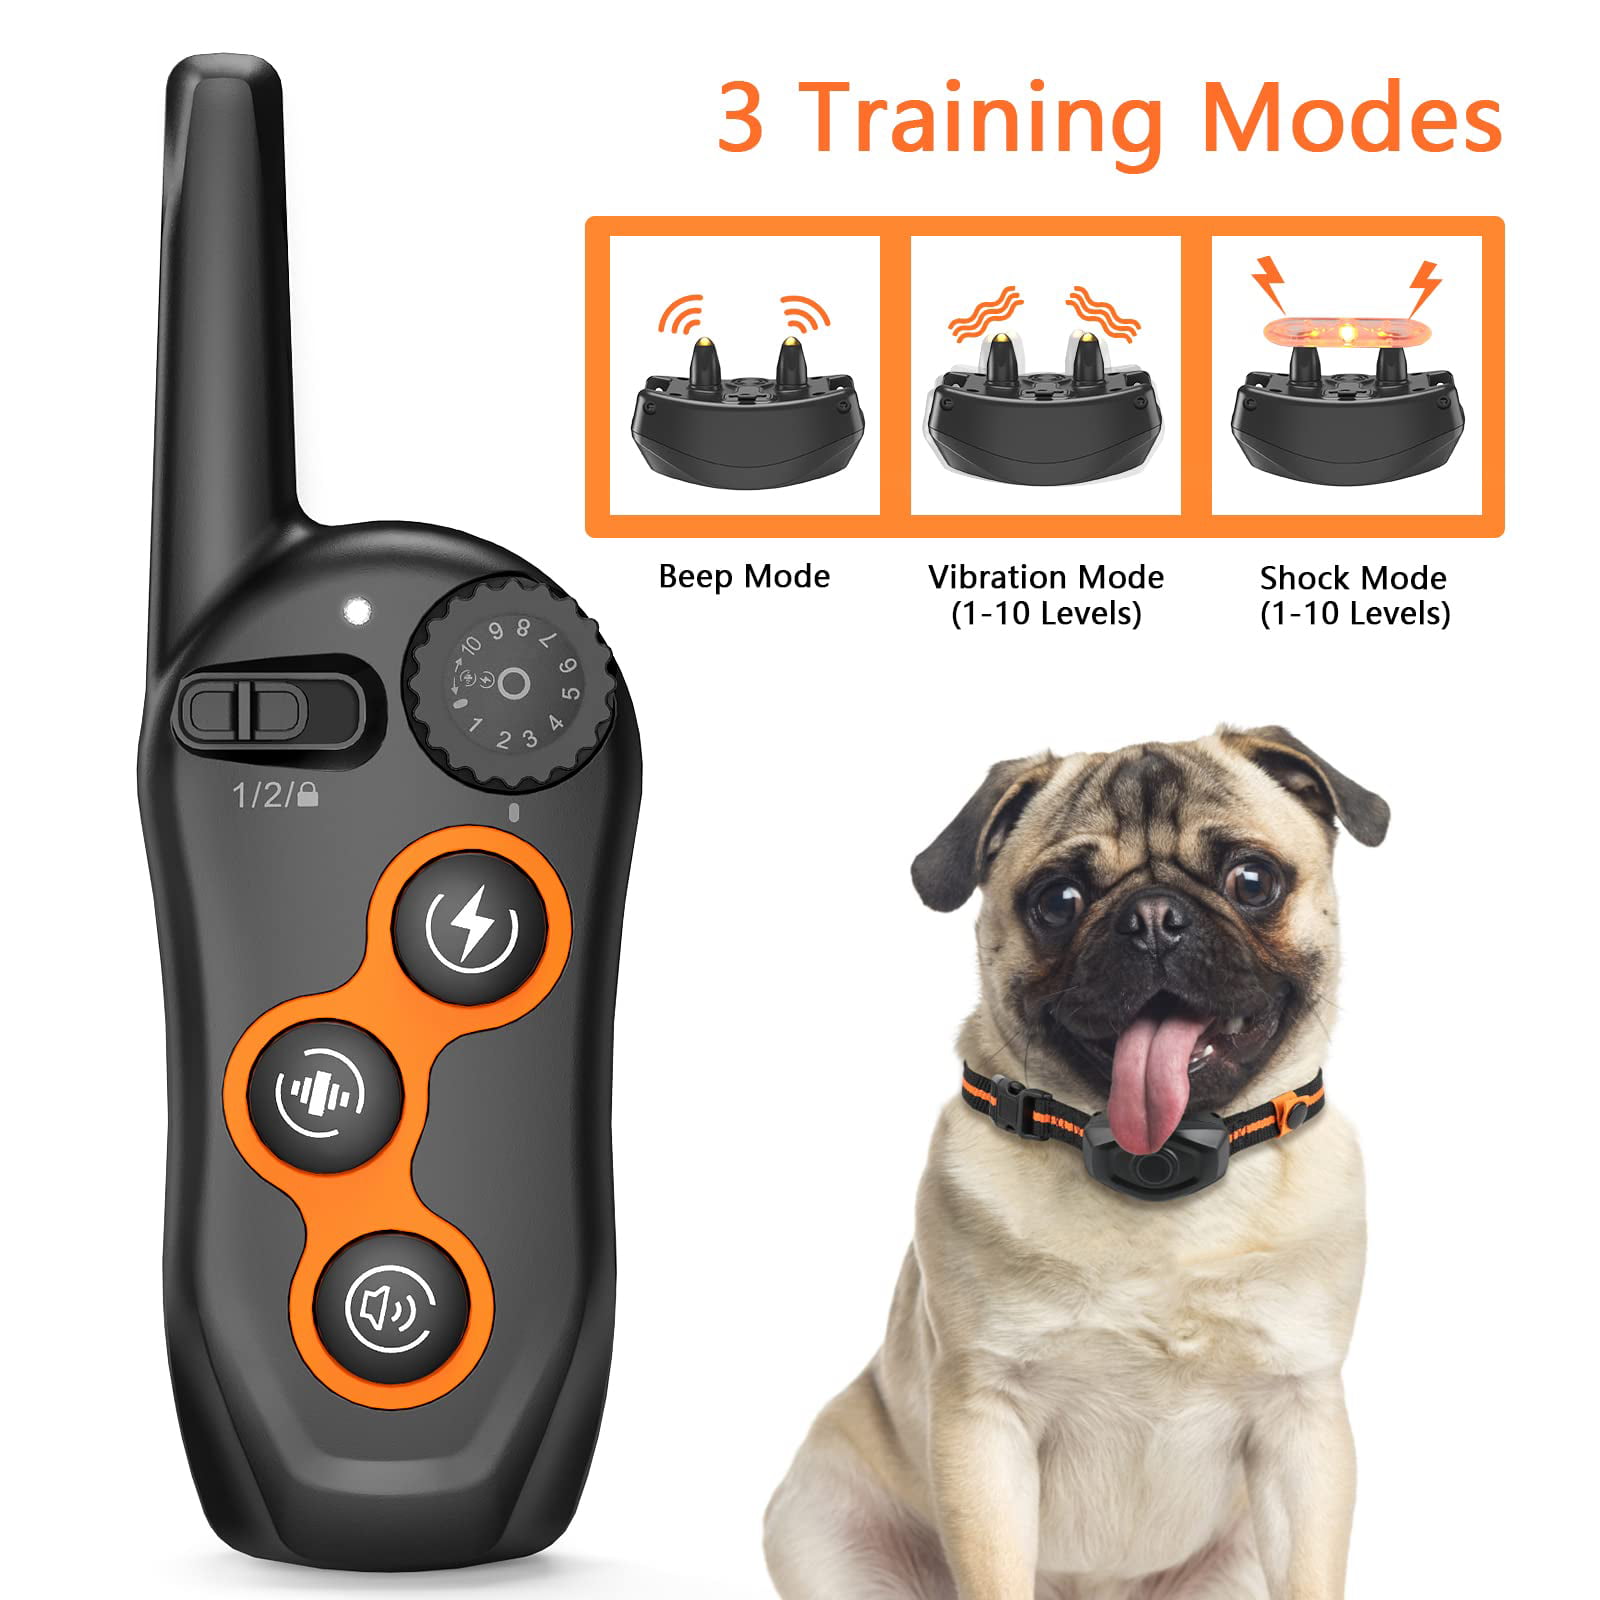 MAISOIE Dog Training Collar, IPX7 Waterproof Dog Shock Collar with Remote  Range 1300ft, 3 Training Modes, Beep, Shock, Vibration, Rechargeable Electric  Shock Collar for Small Medium Large Dogs 